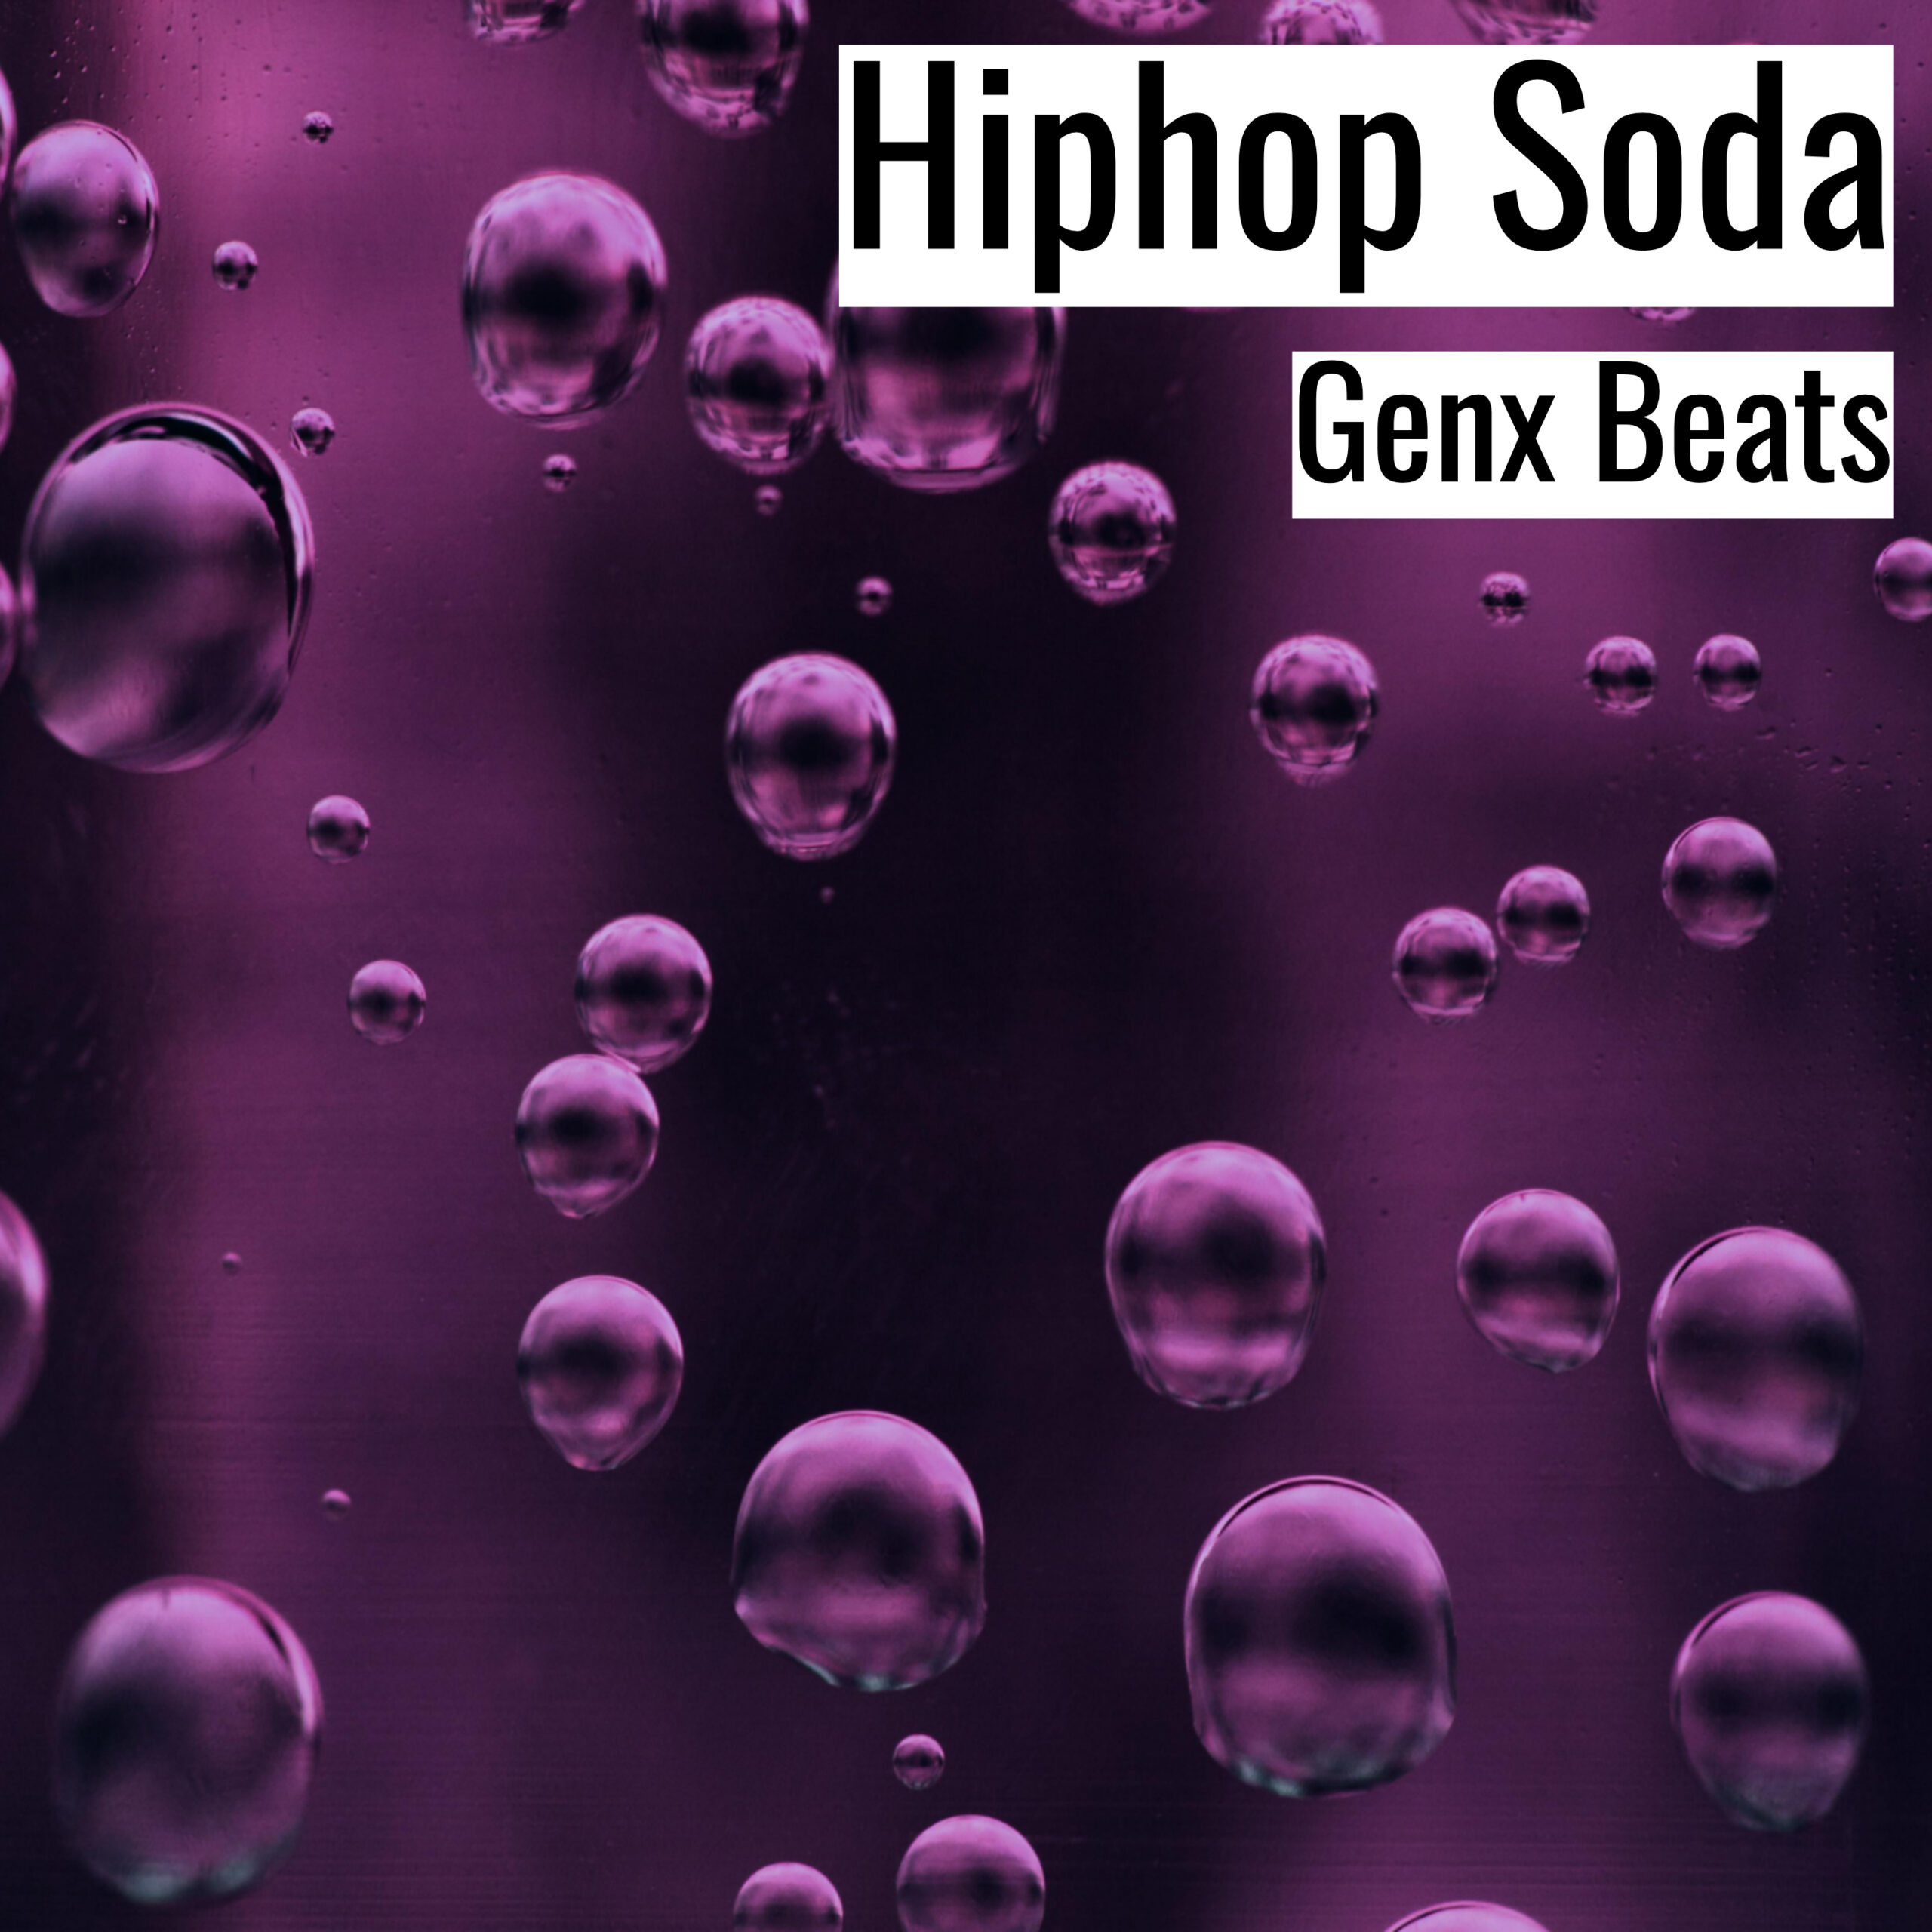 Hiphop Soda scaled